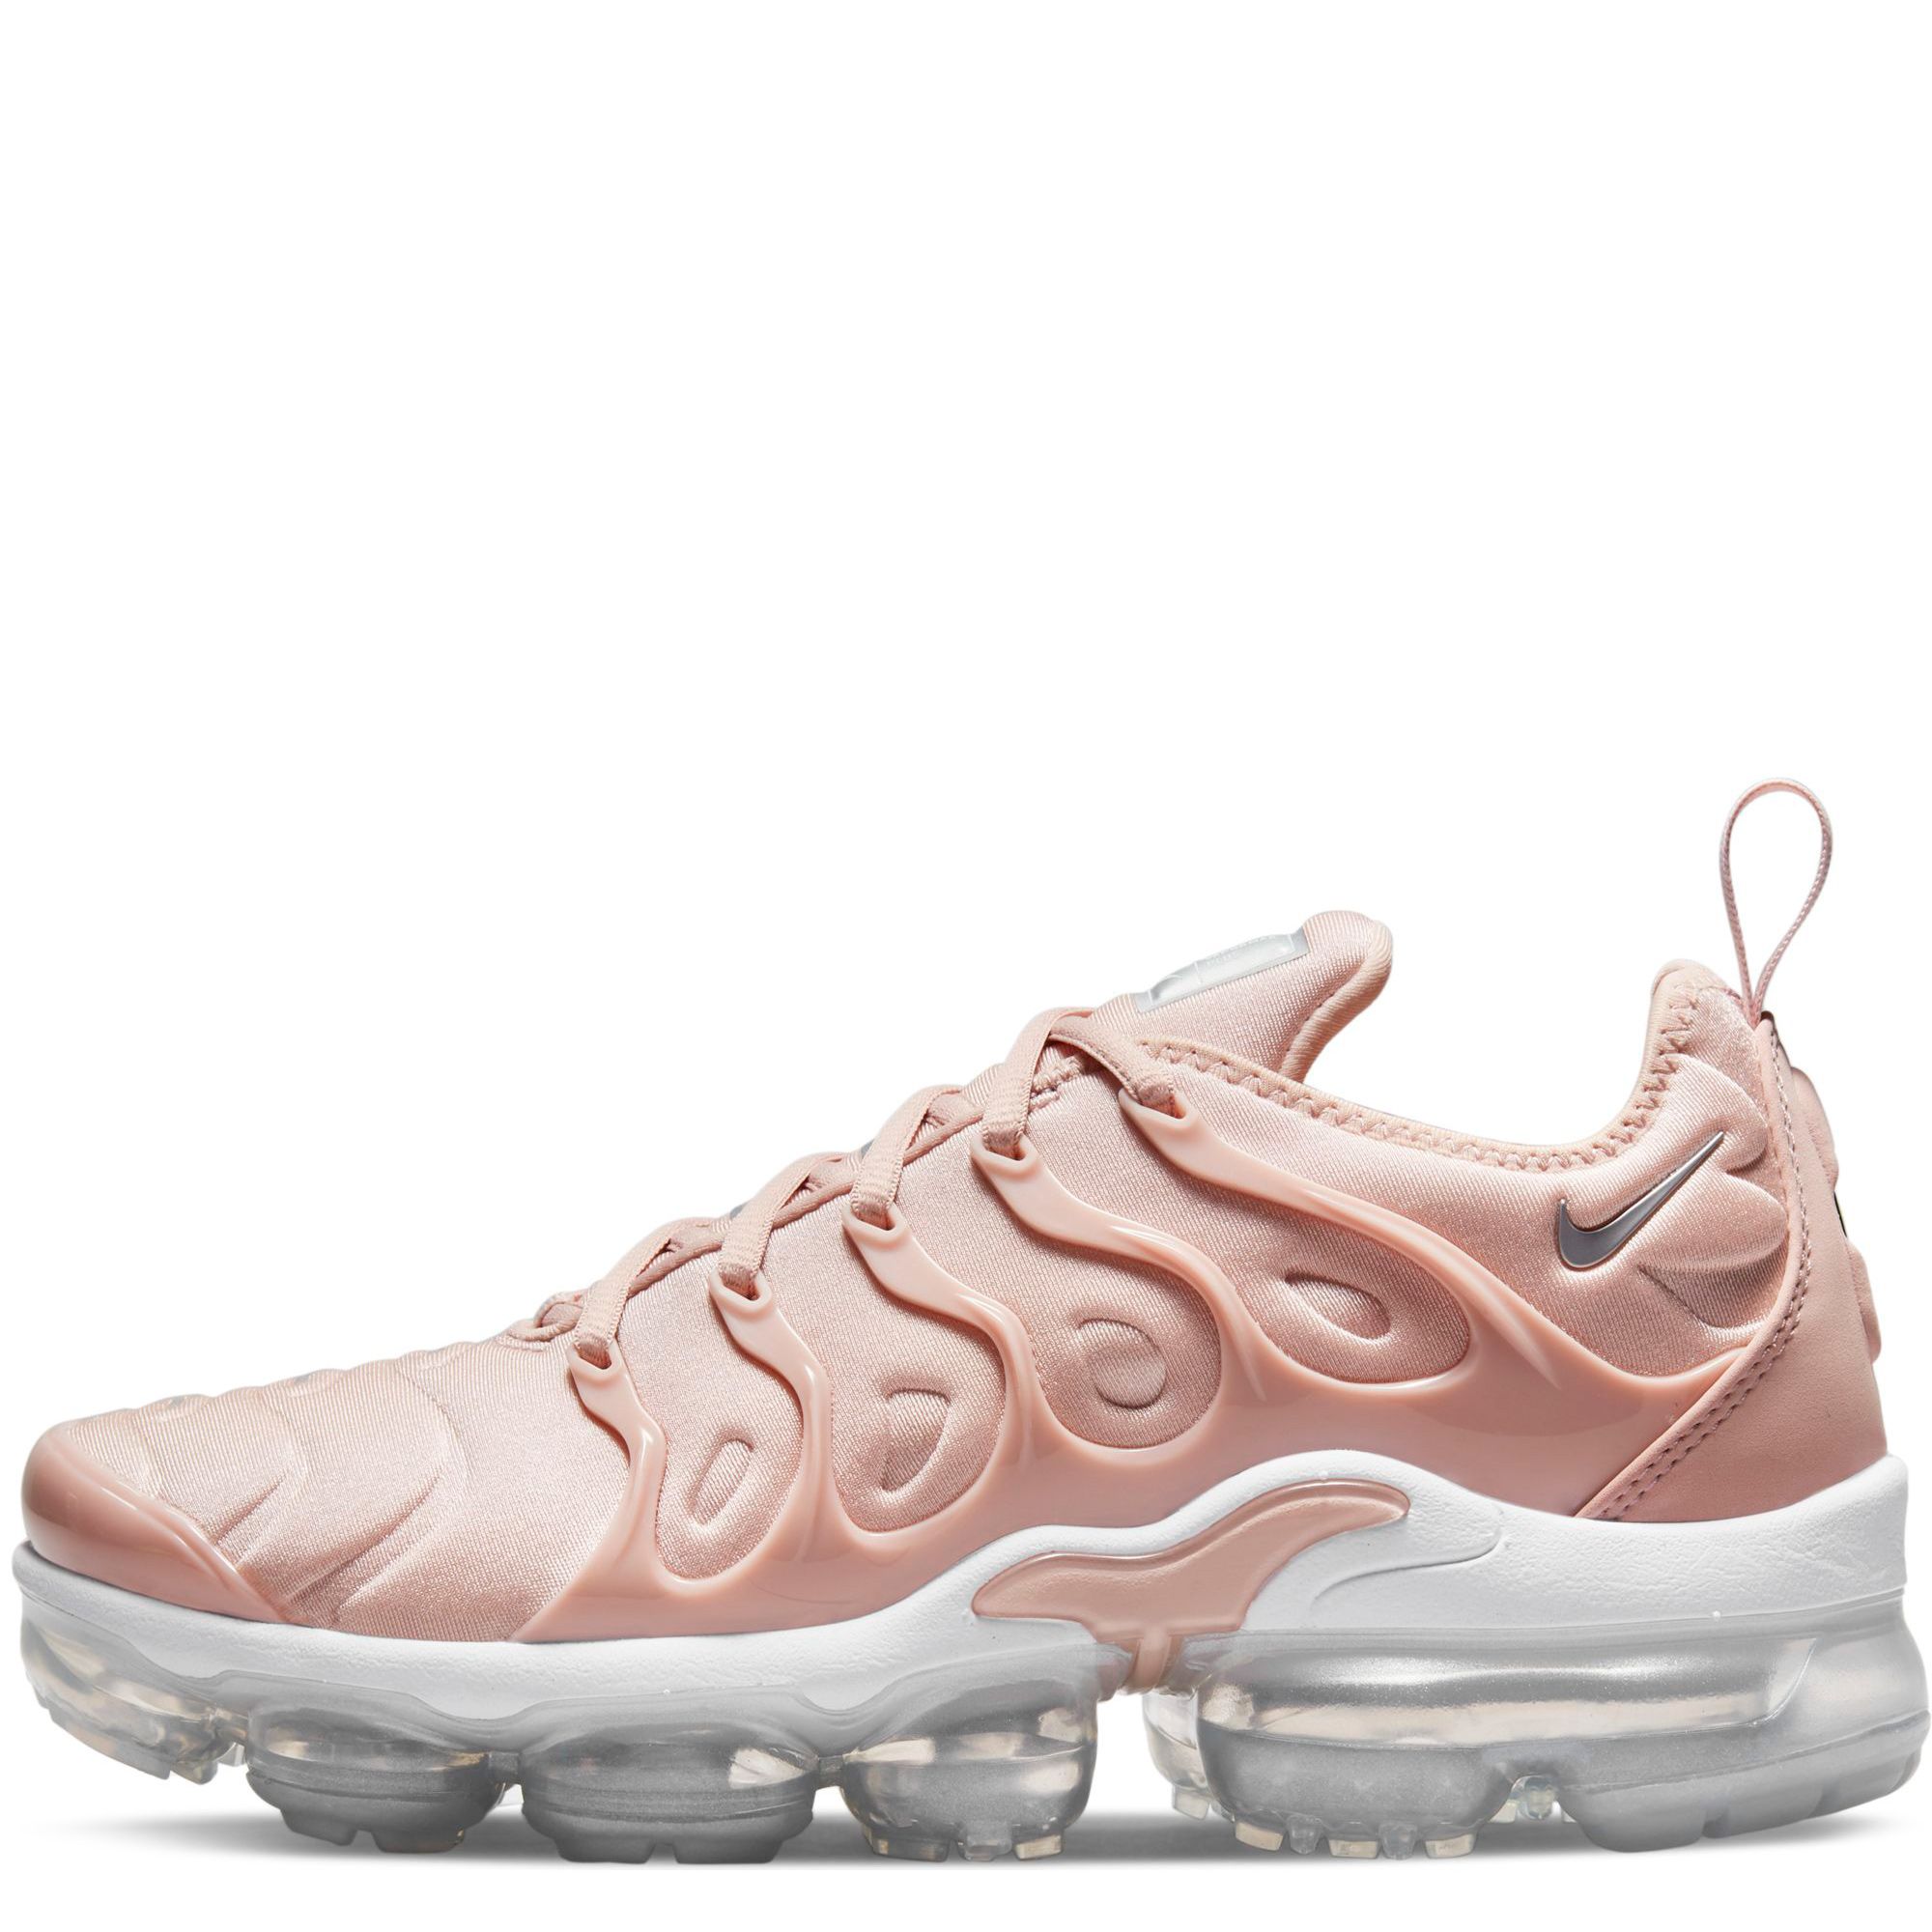 vapormax plus in pink oxford